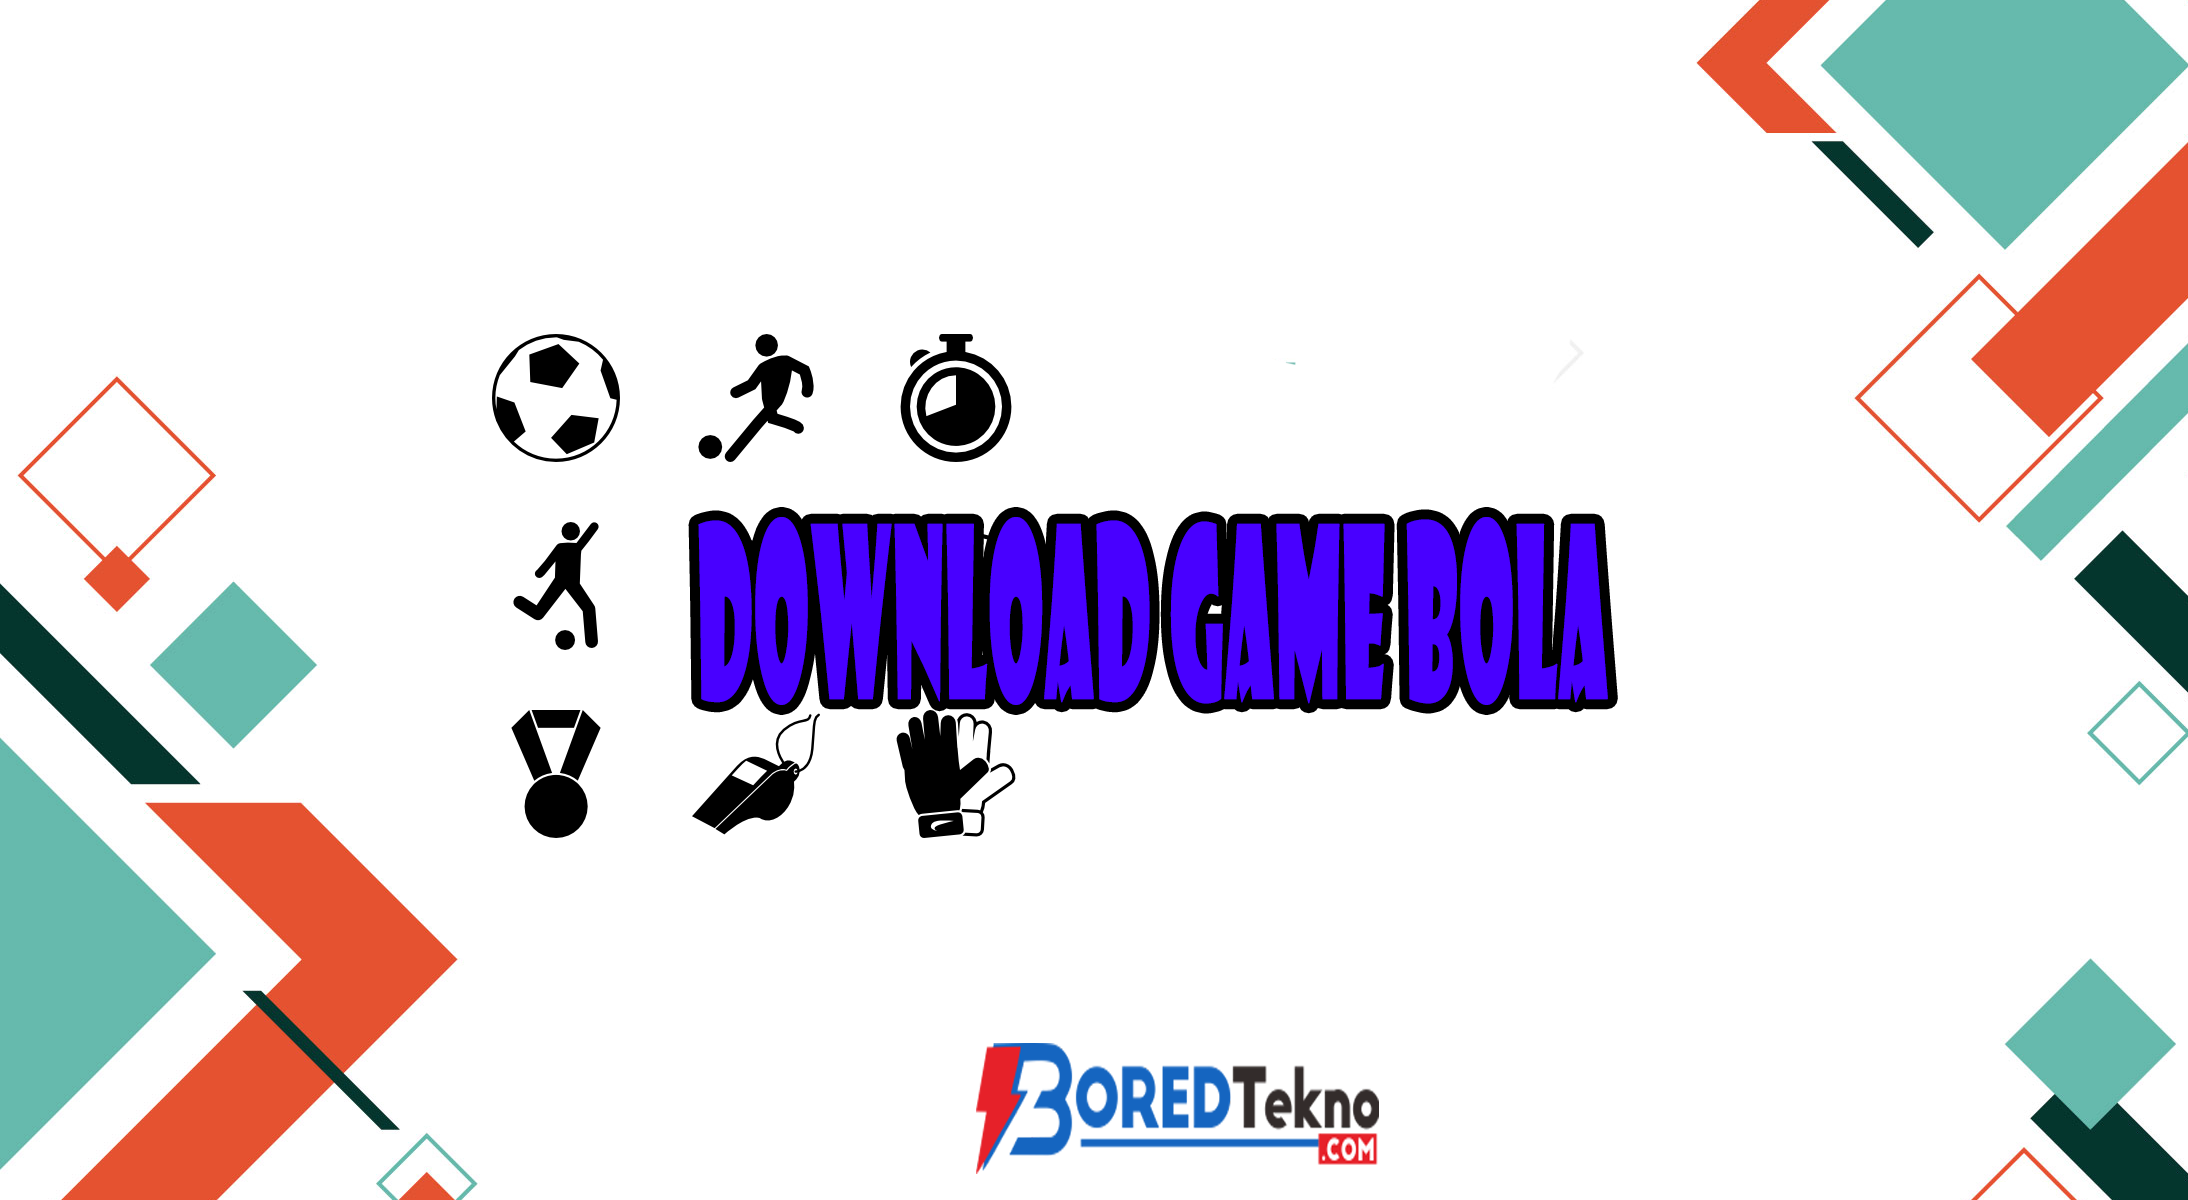 Download Game Bola